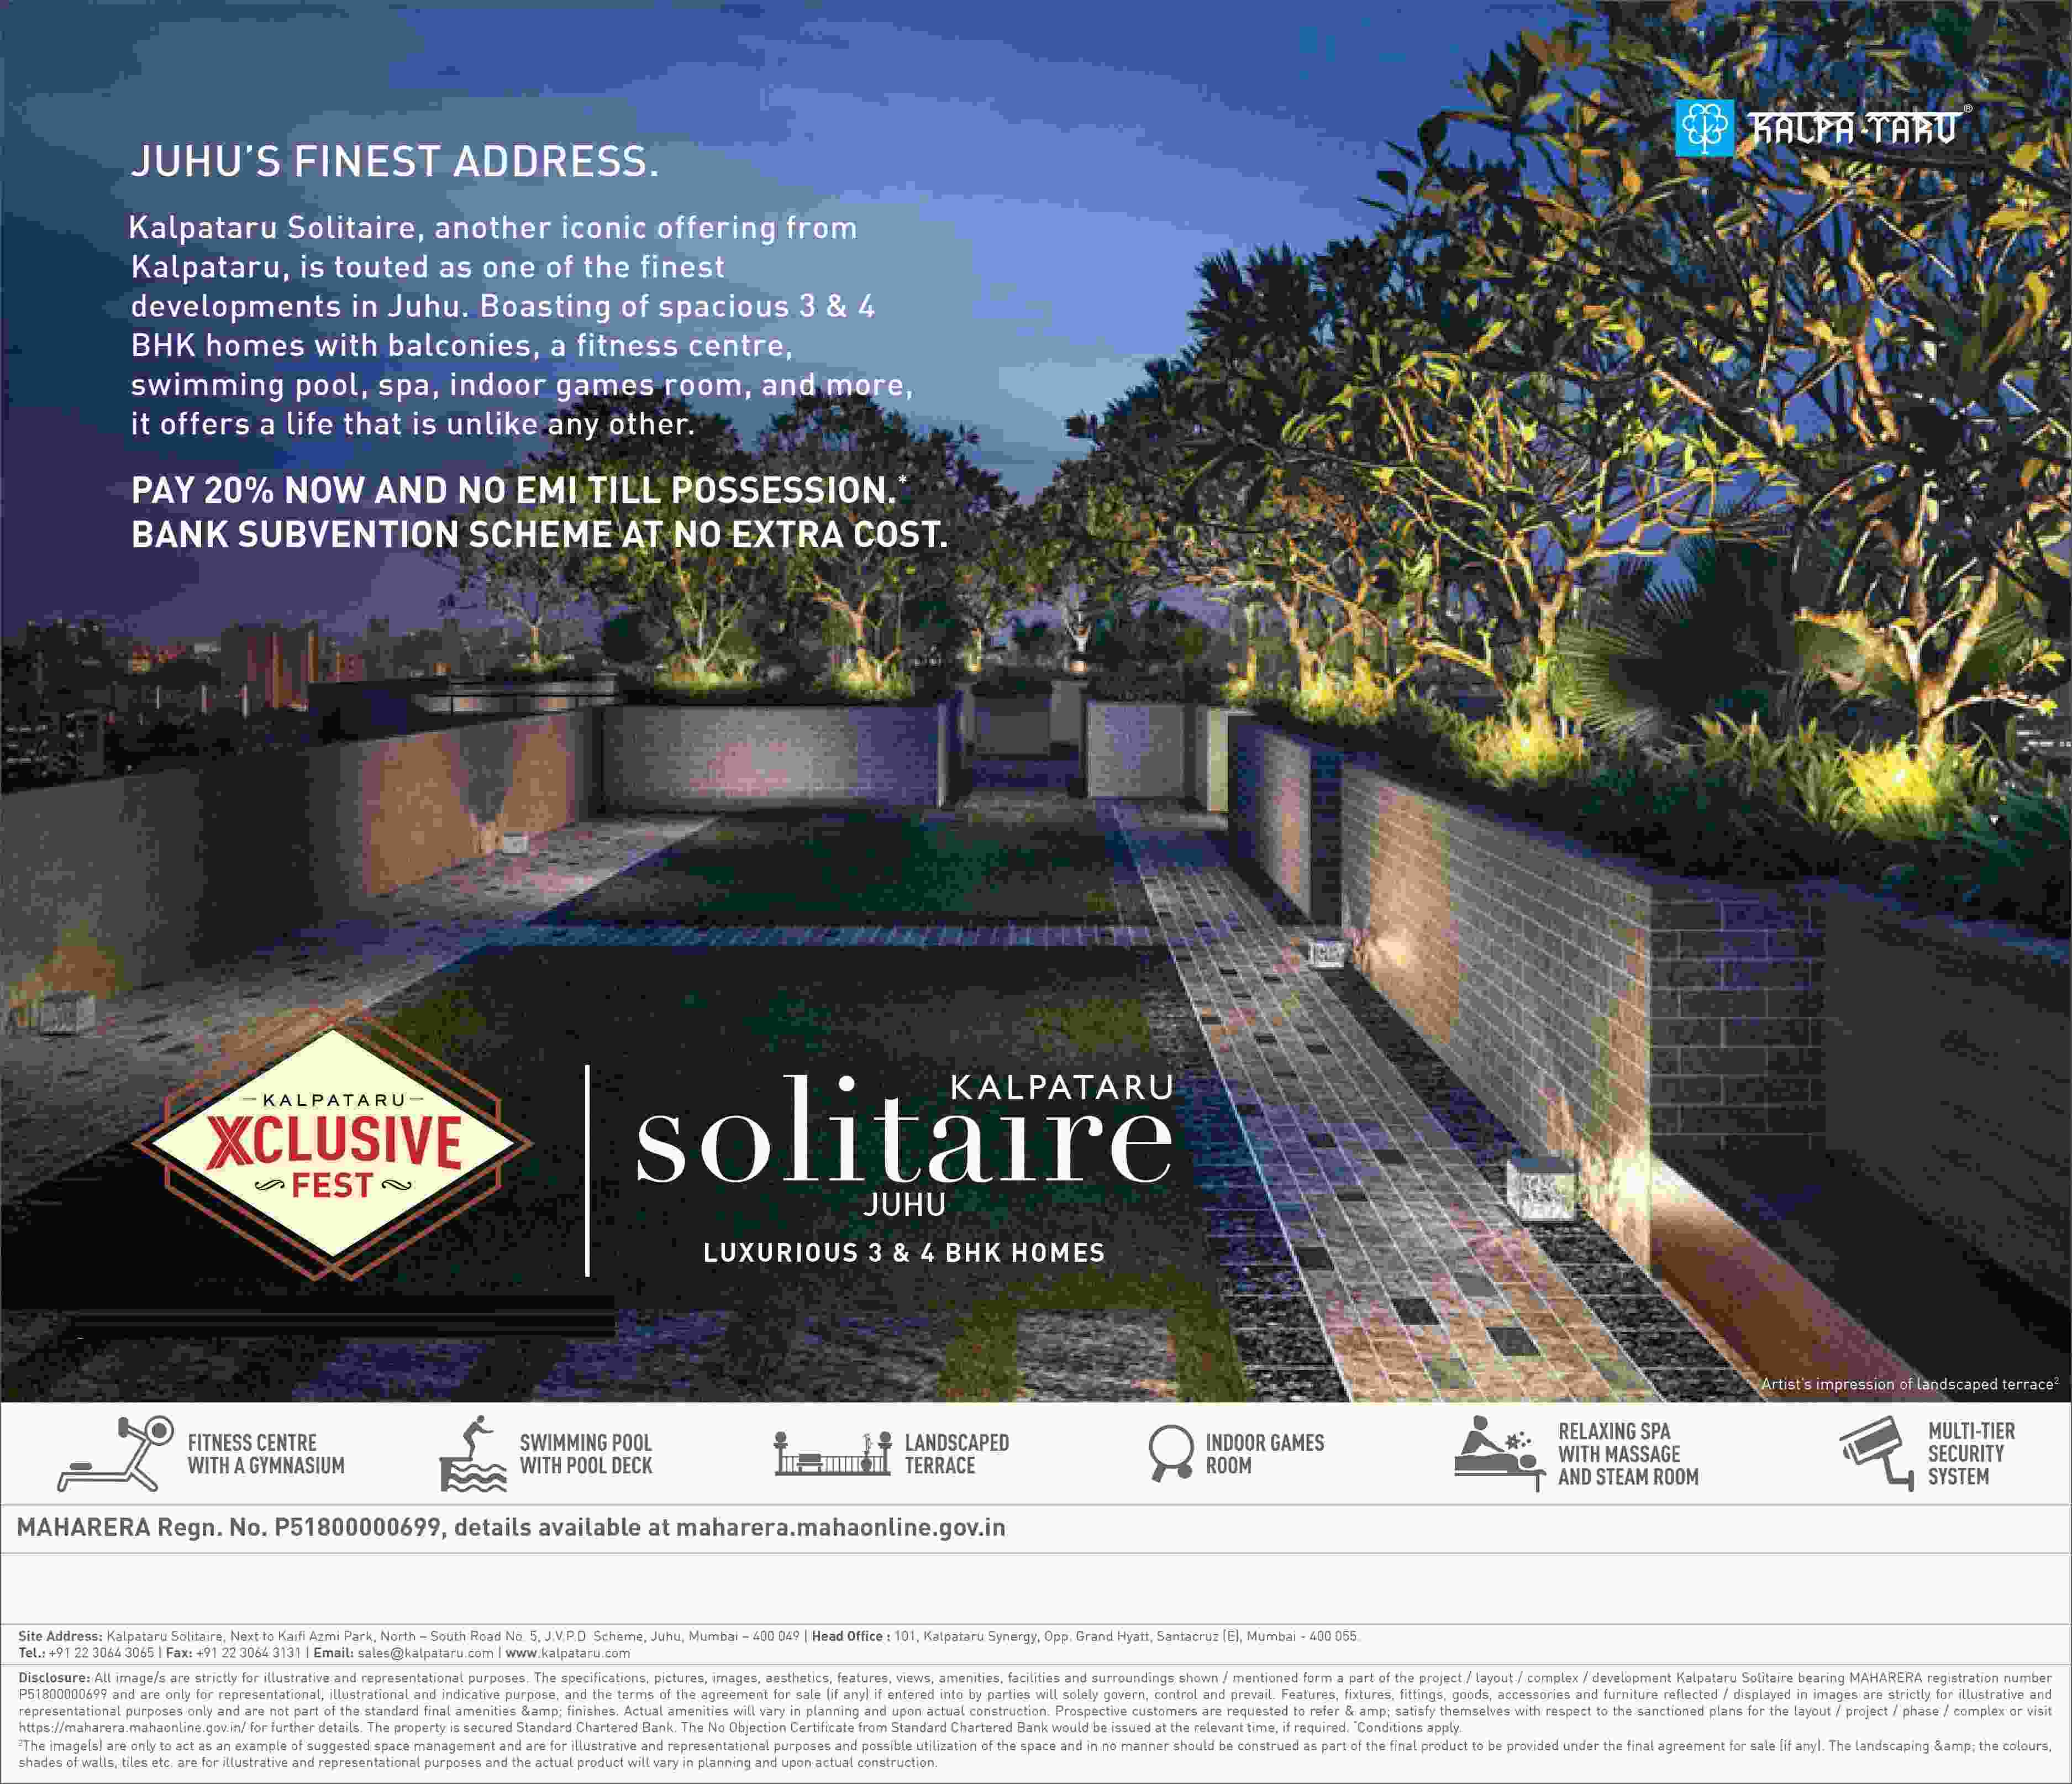 Pay 20% now and no EMI till possession at Kalpataru Solitaire in Mumbai Update